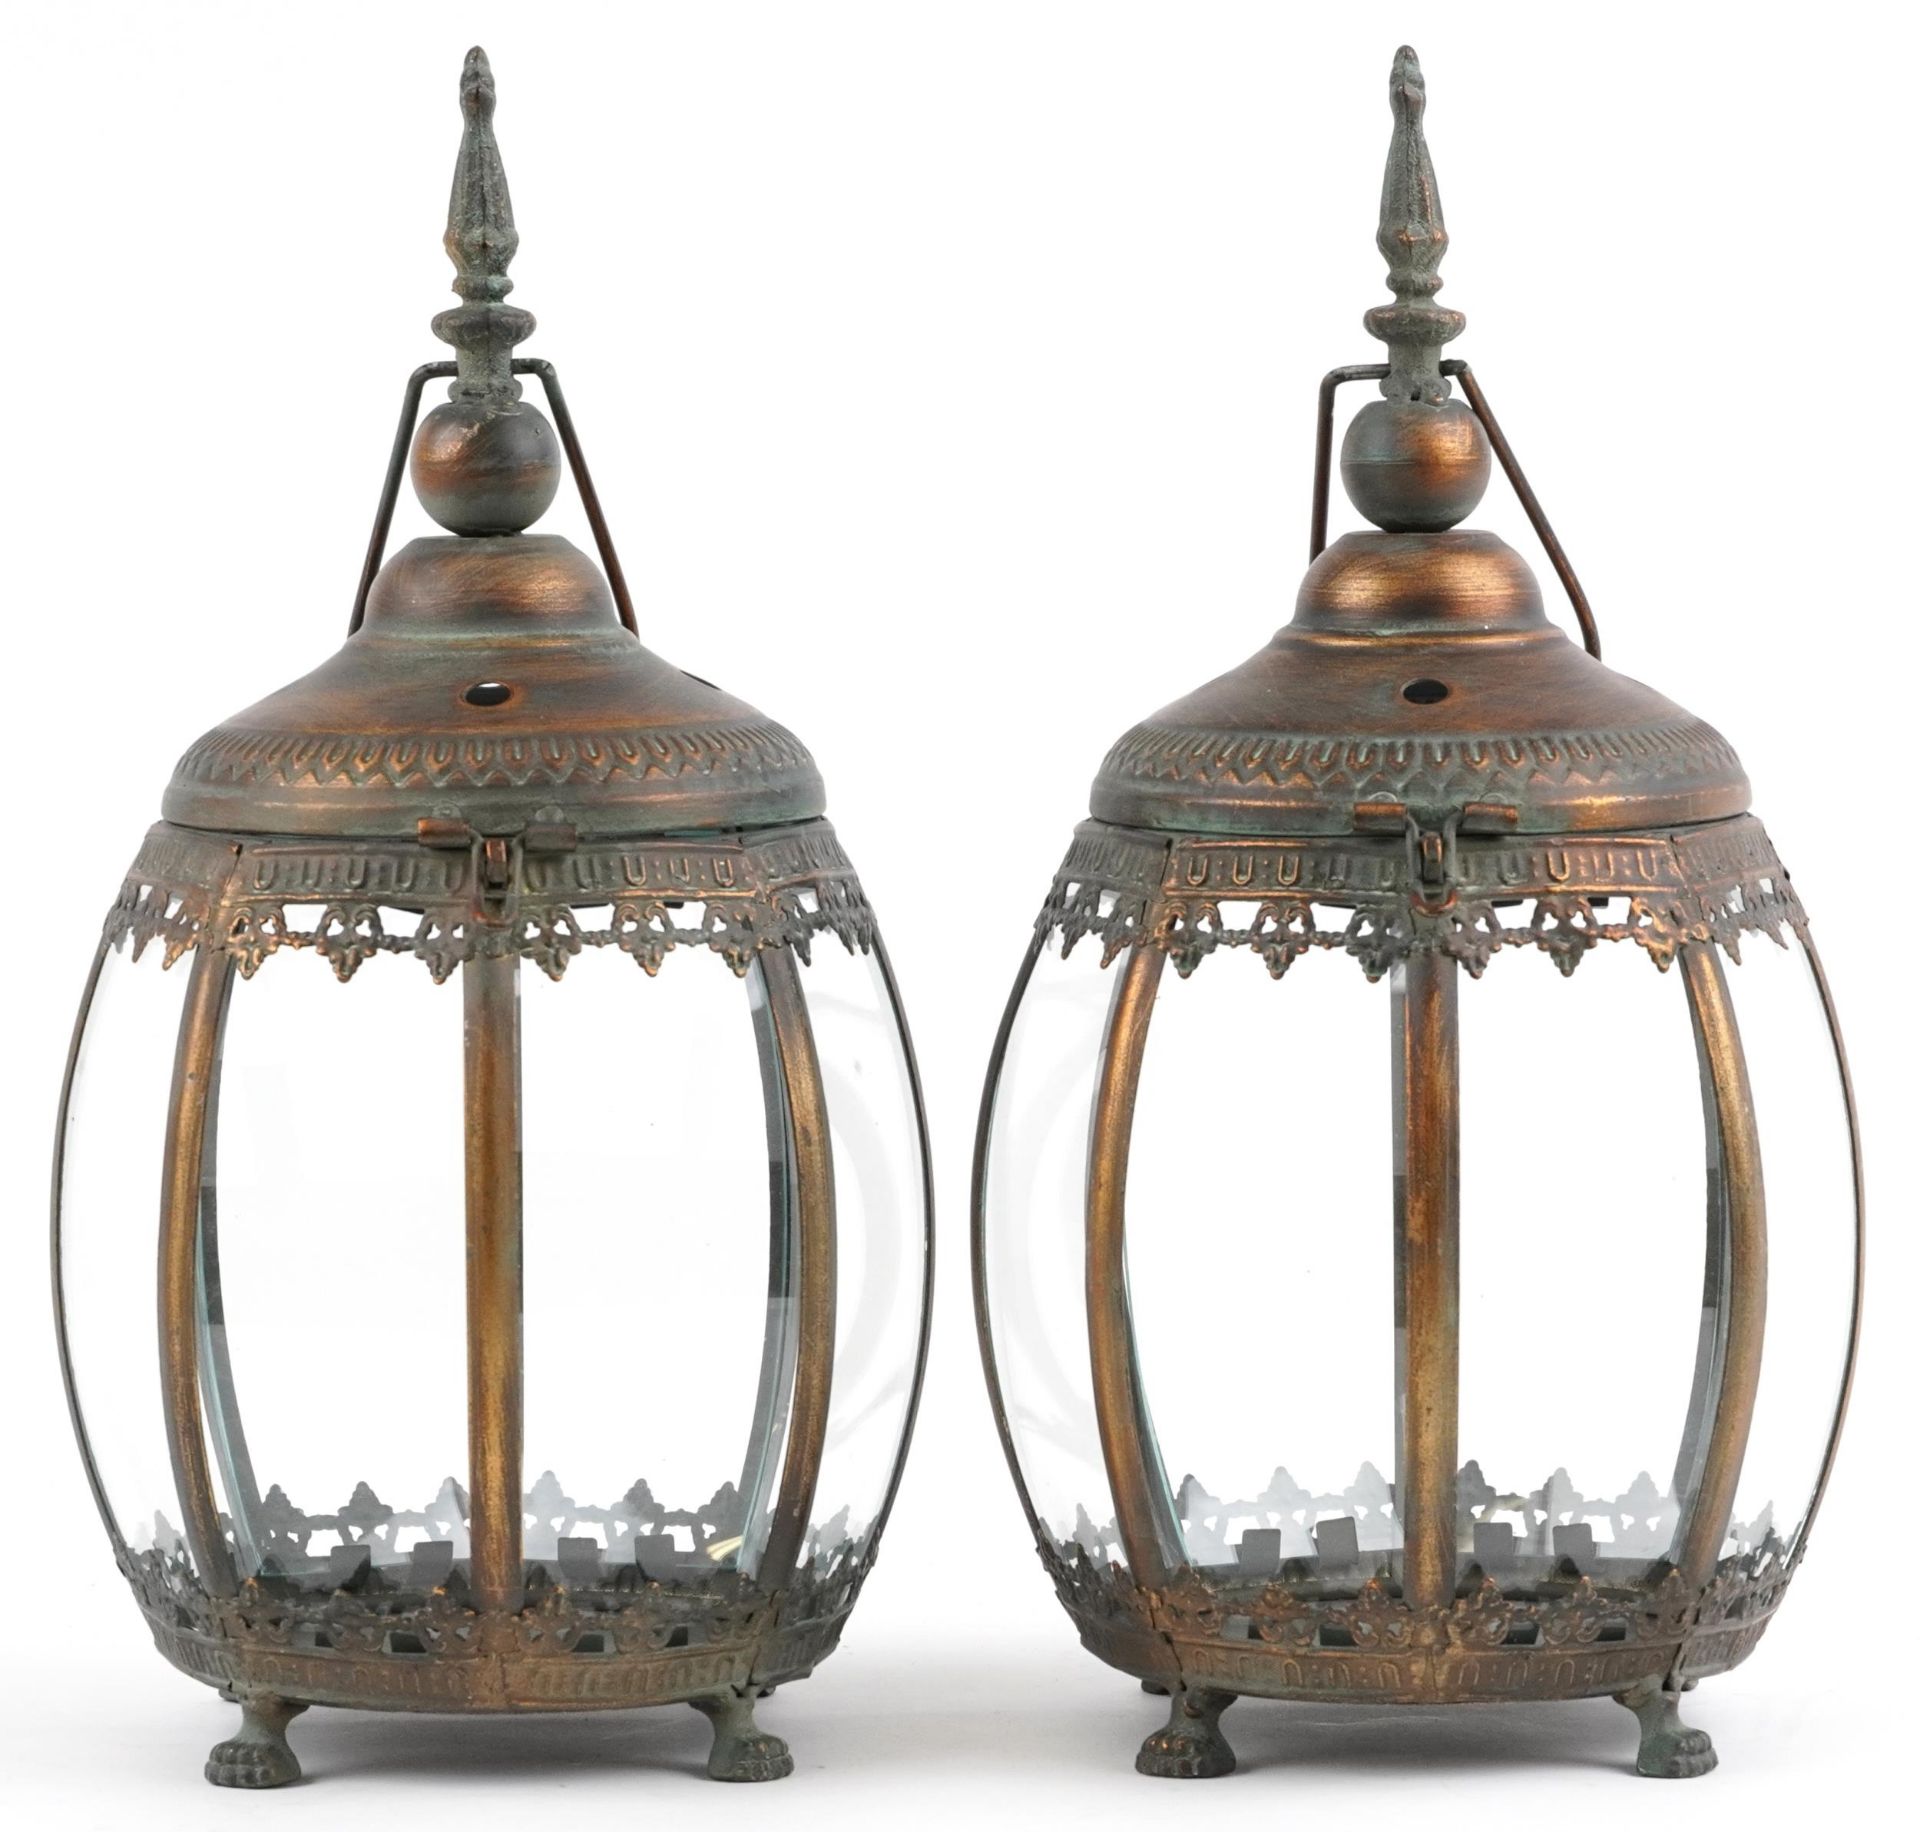 Pair of bronzed hanging lanterns with glass panels on paw feet, each 39.5cm high : For further